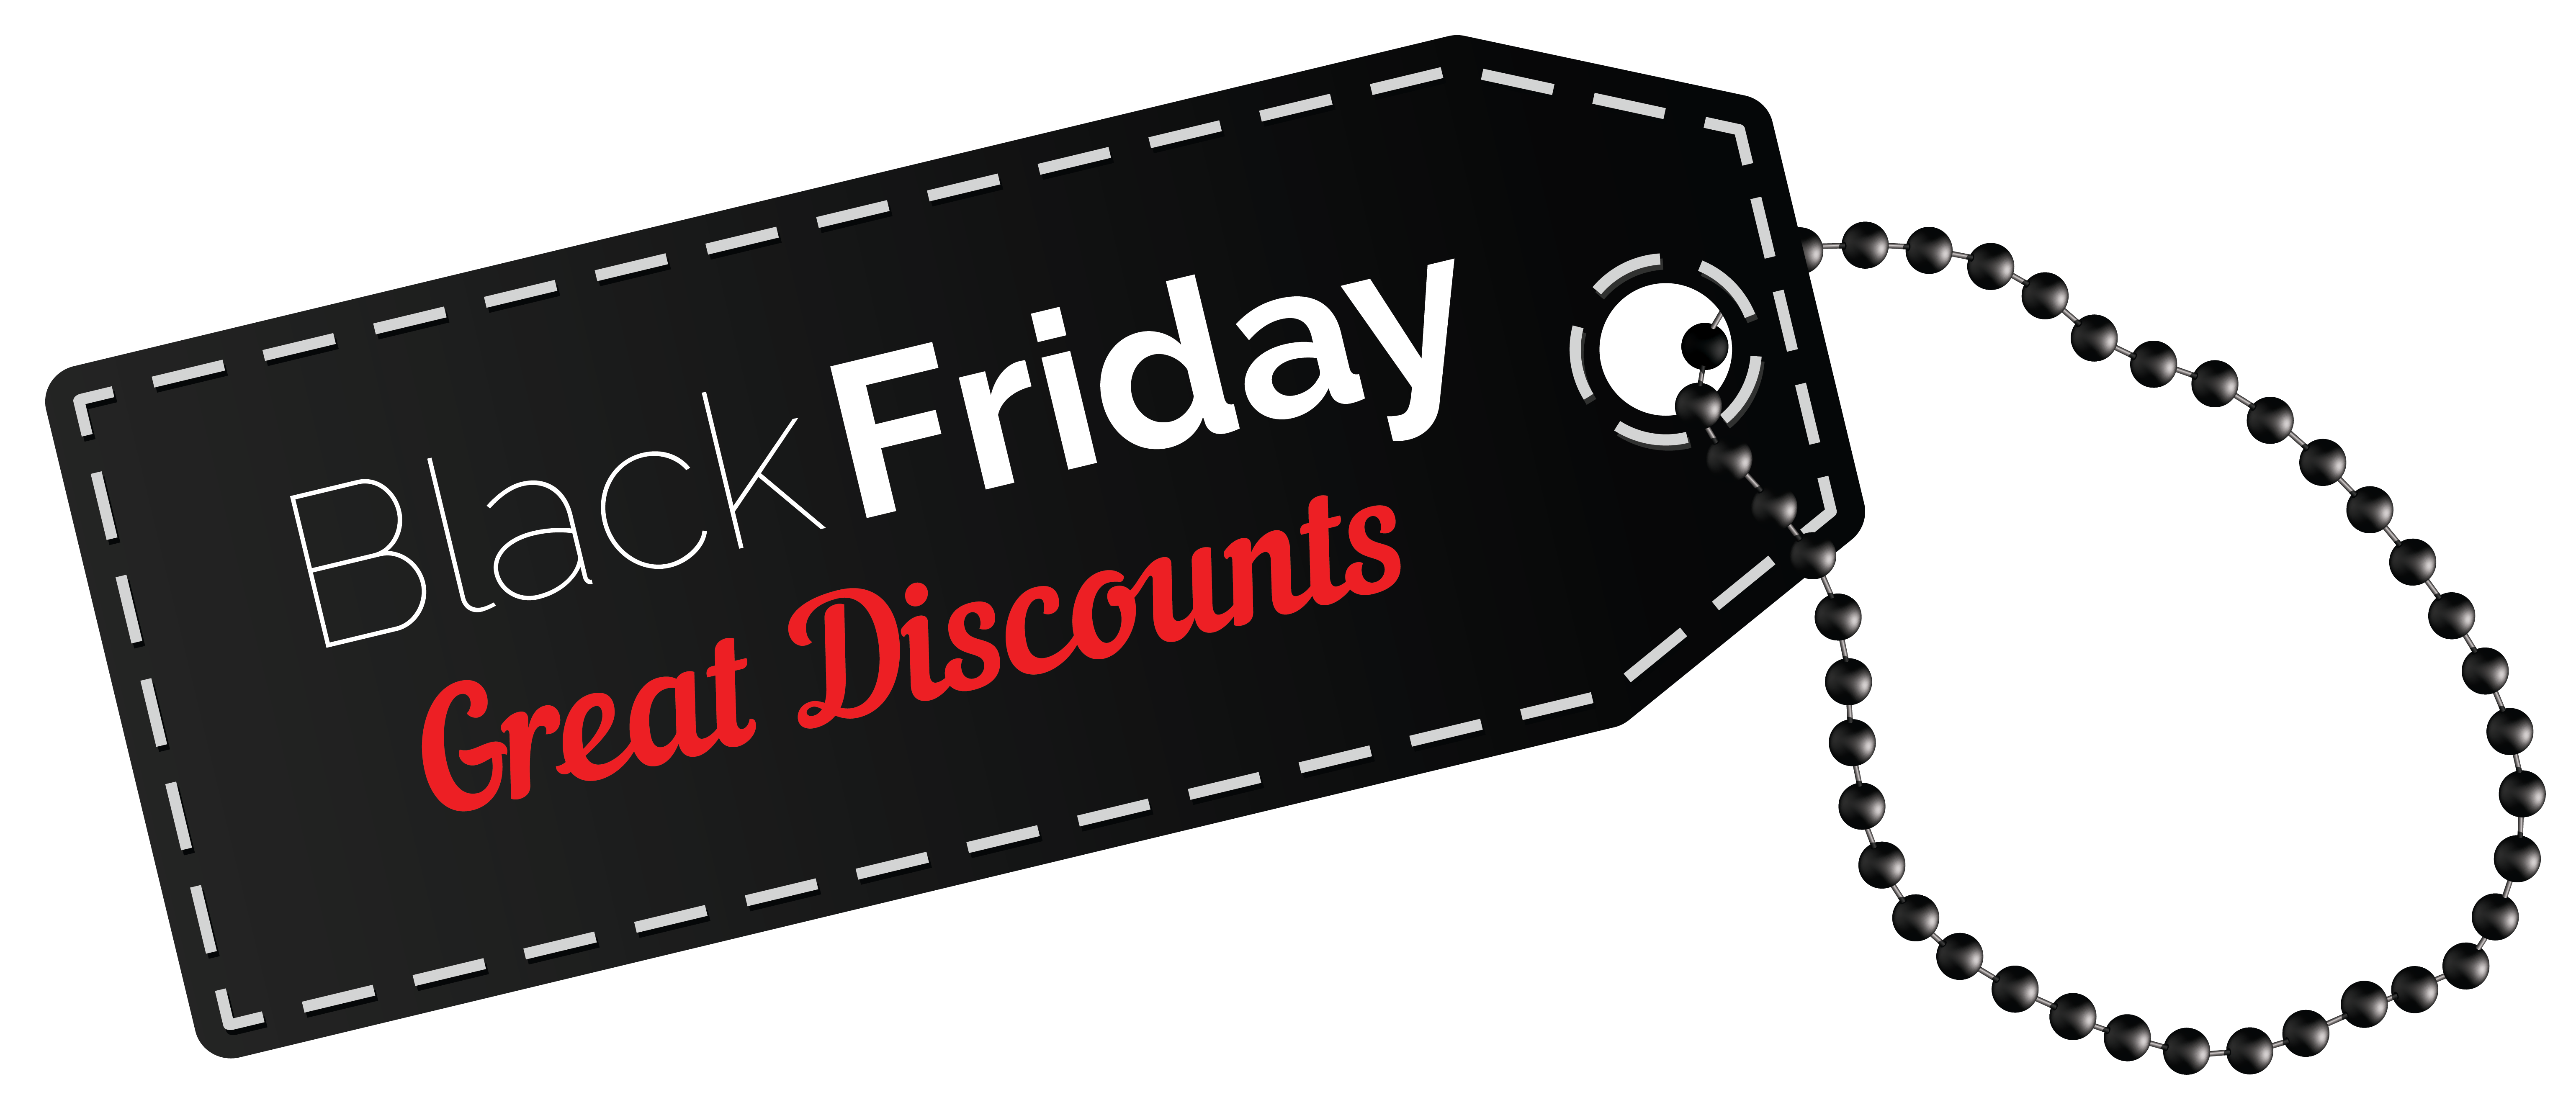 Black Friday Discounts Png Transparent Background Free Download 33097 Freeiconspng